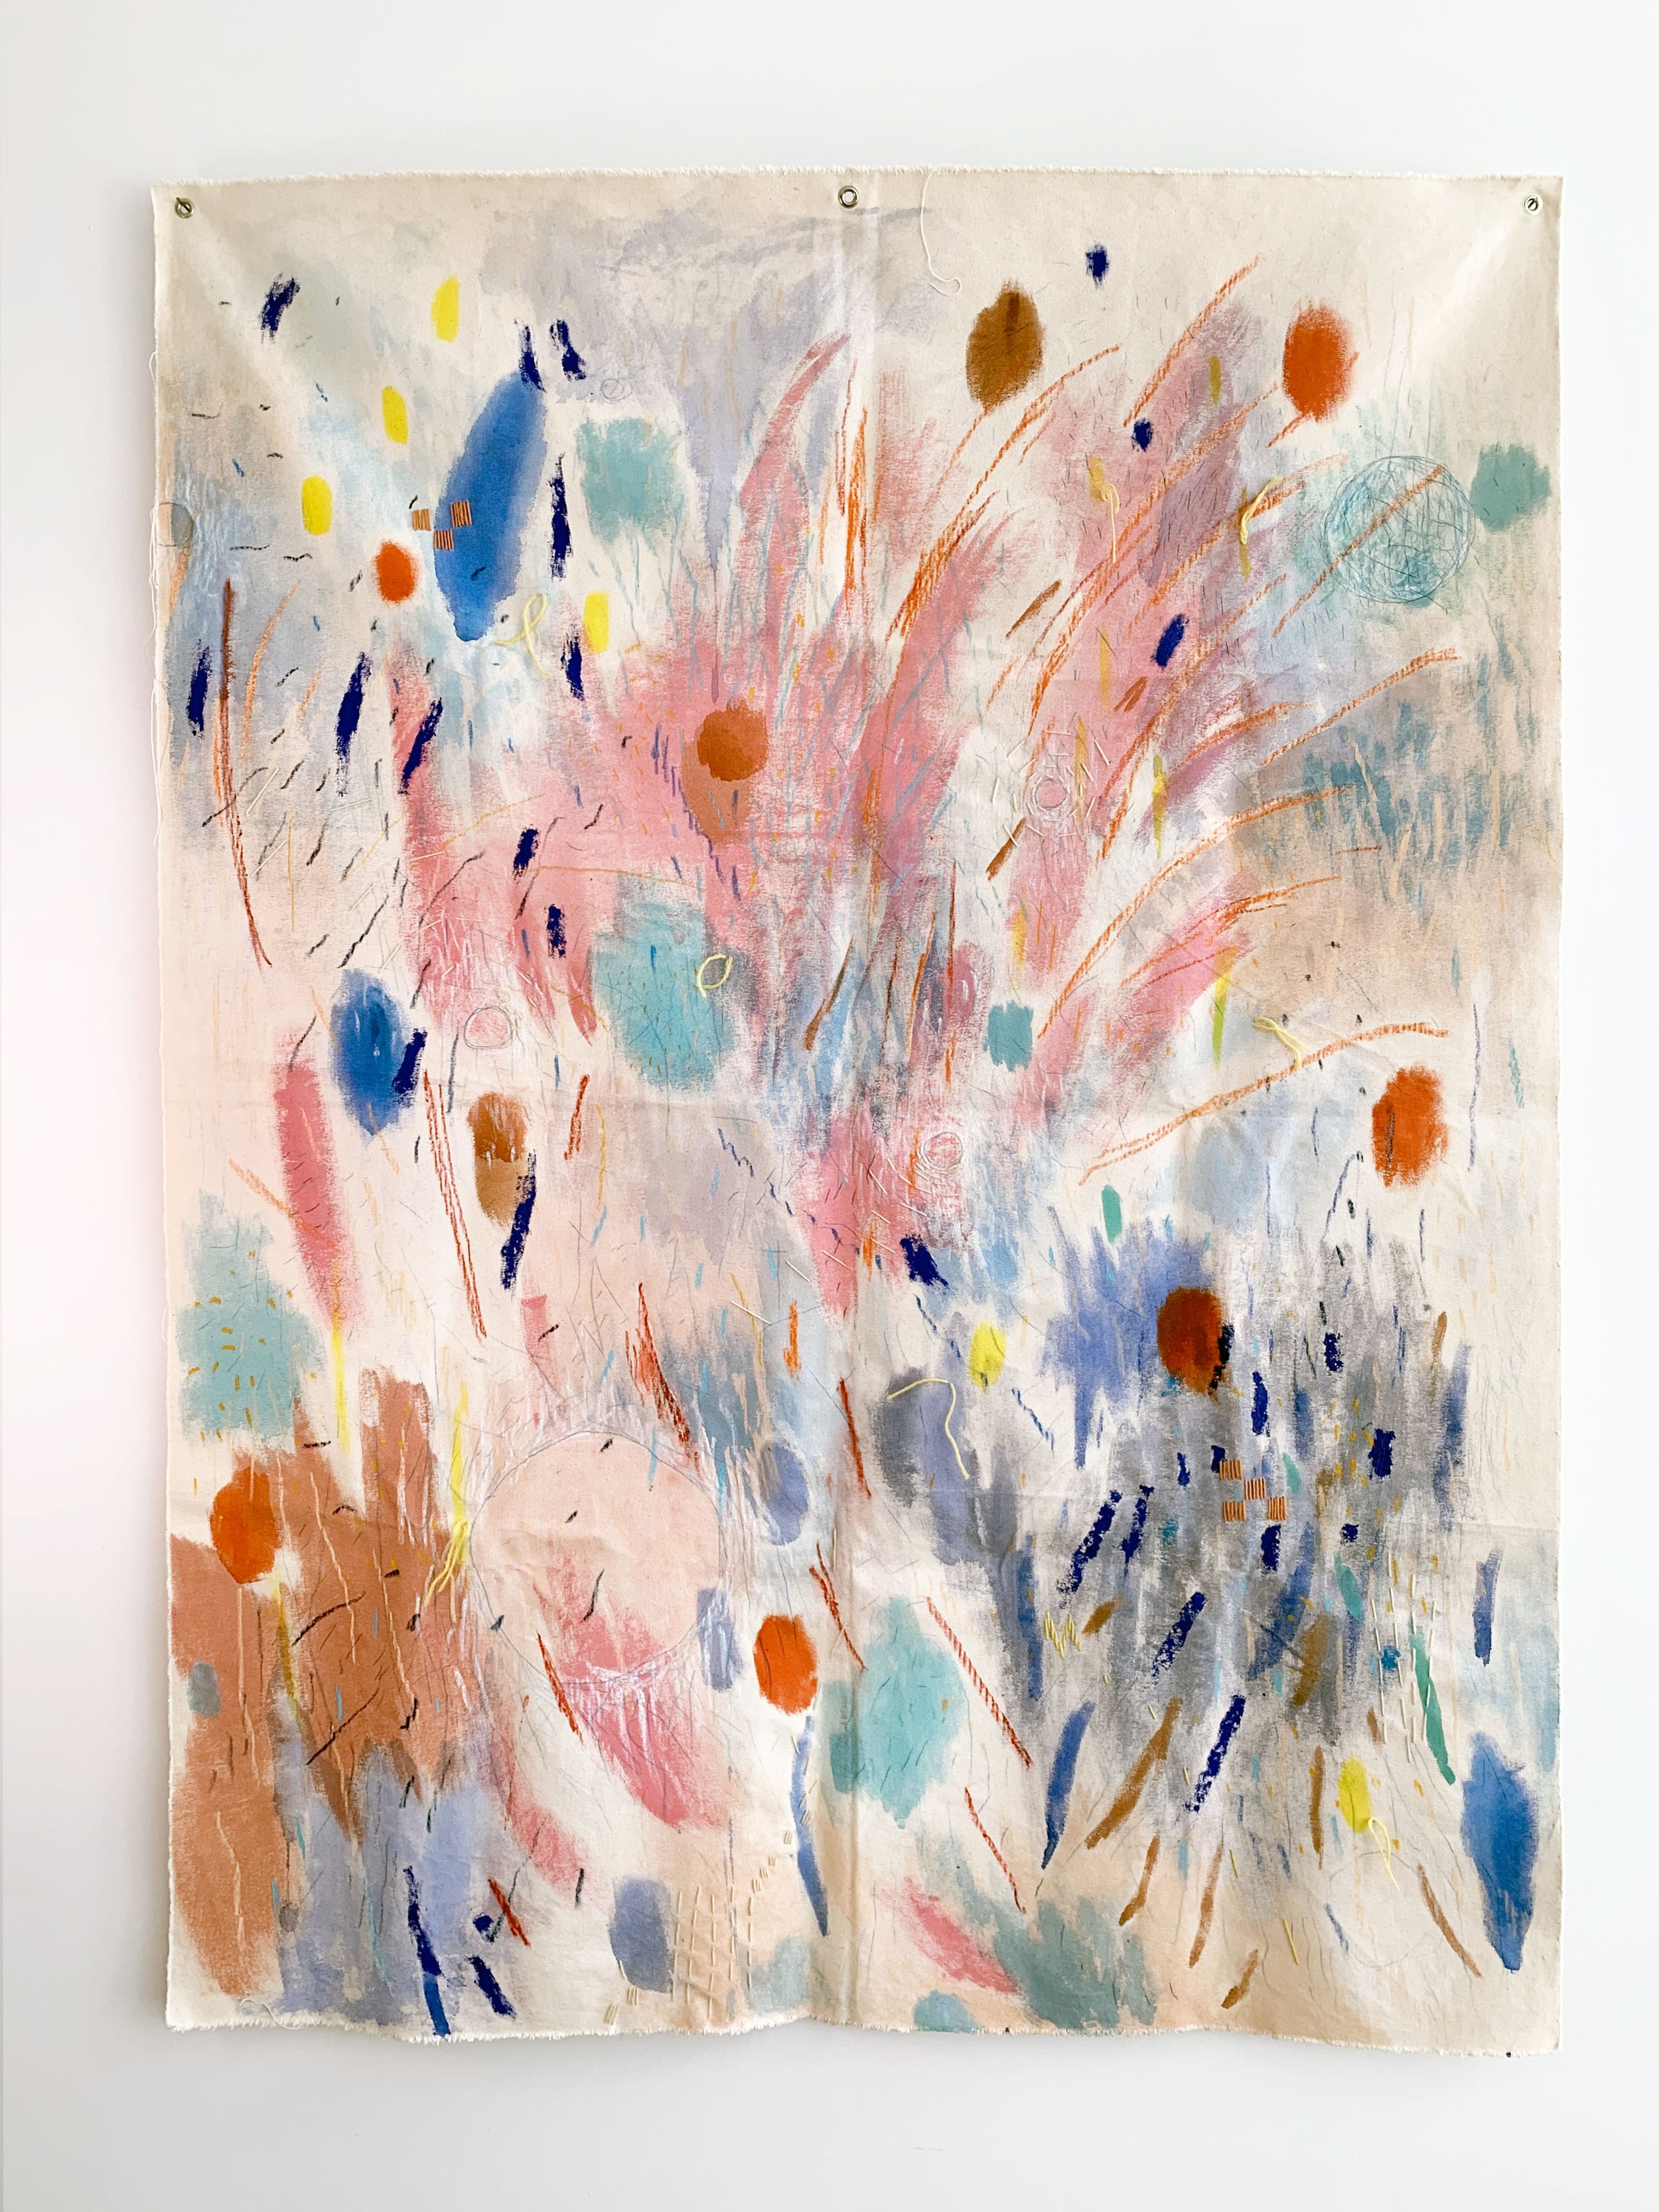   Amada Estabillo’s painting Roman Candle is a bright, abstract painting, reminiscent of tall grass, with wisps of pink, blue and spots of brown, red, orange, and yellow.  